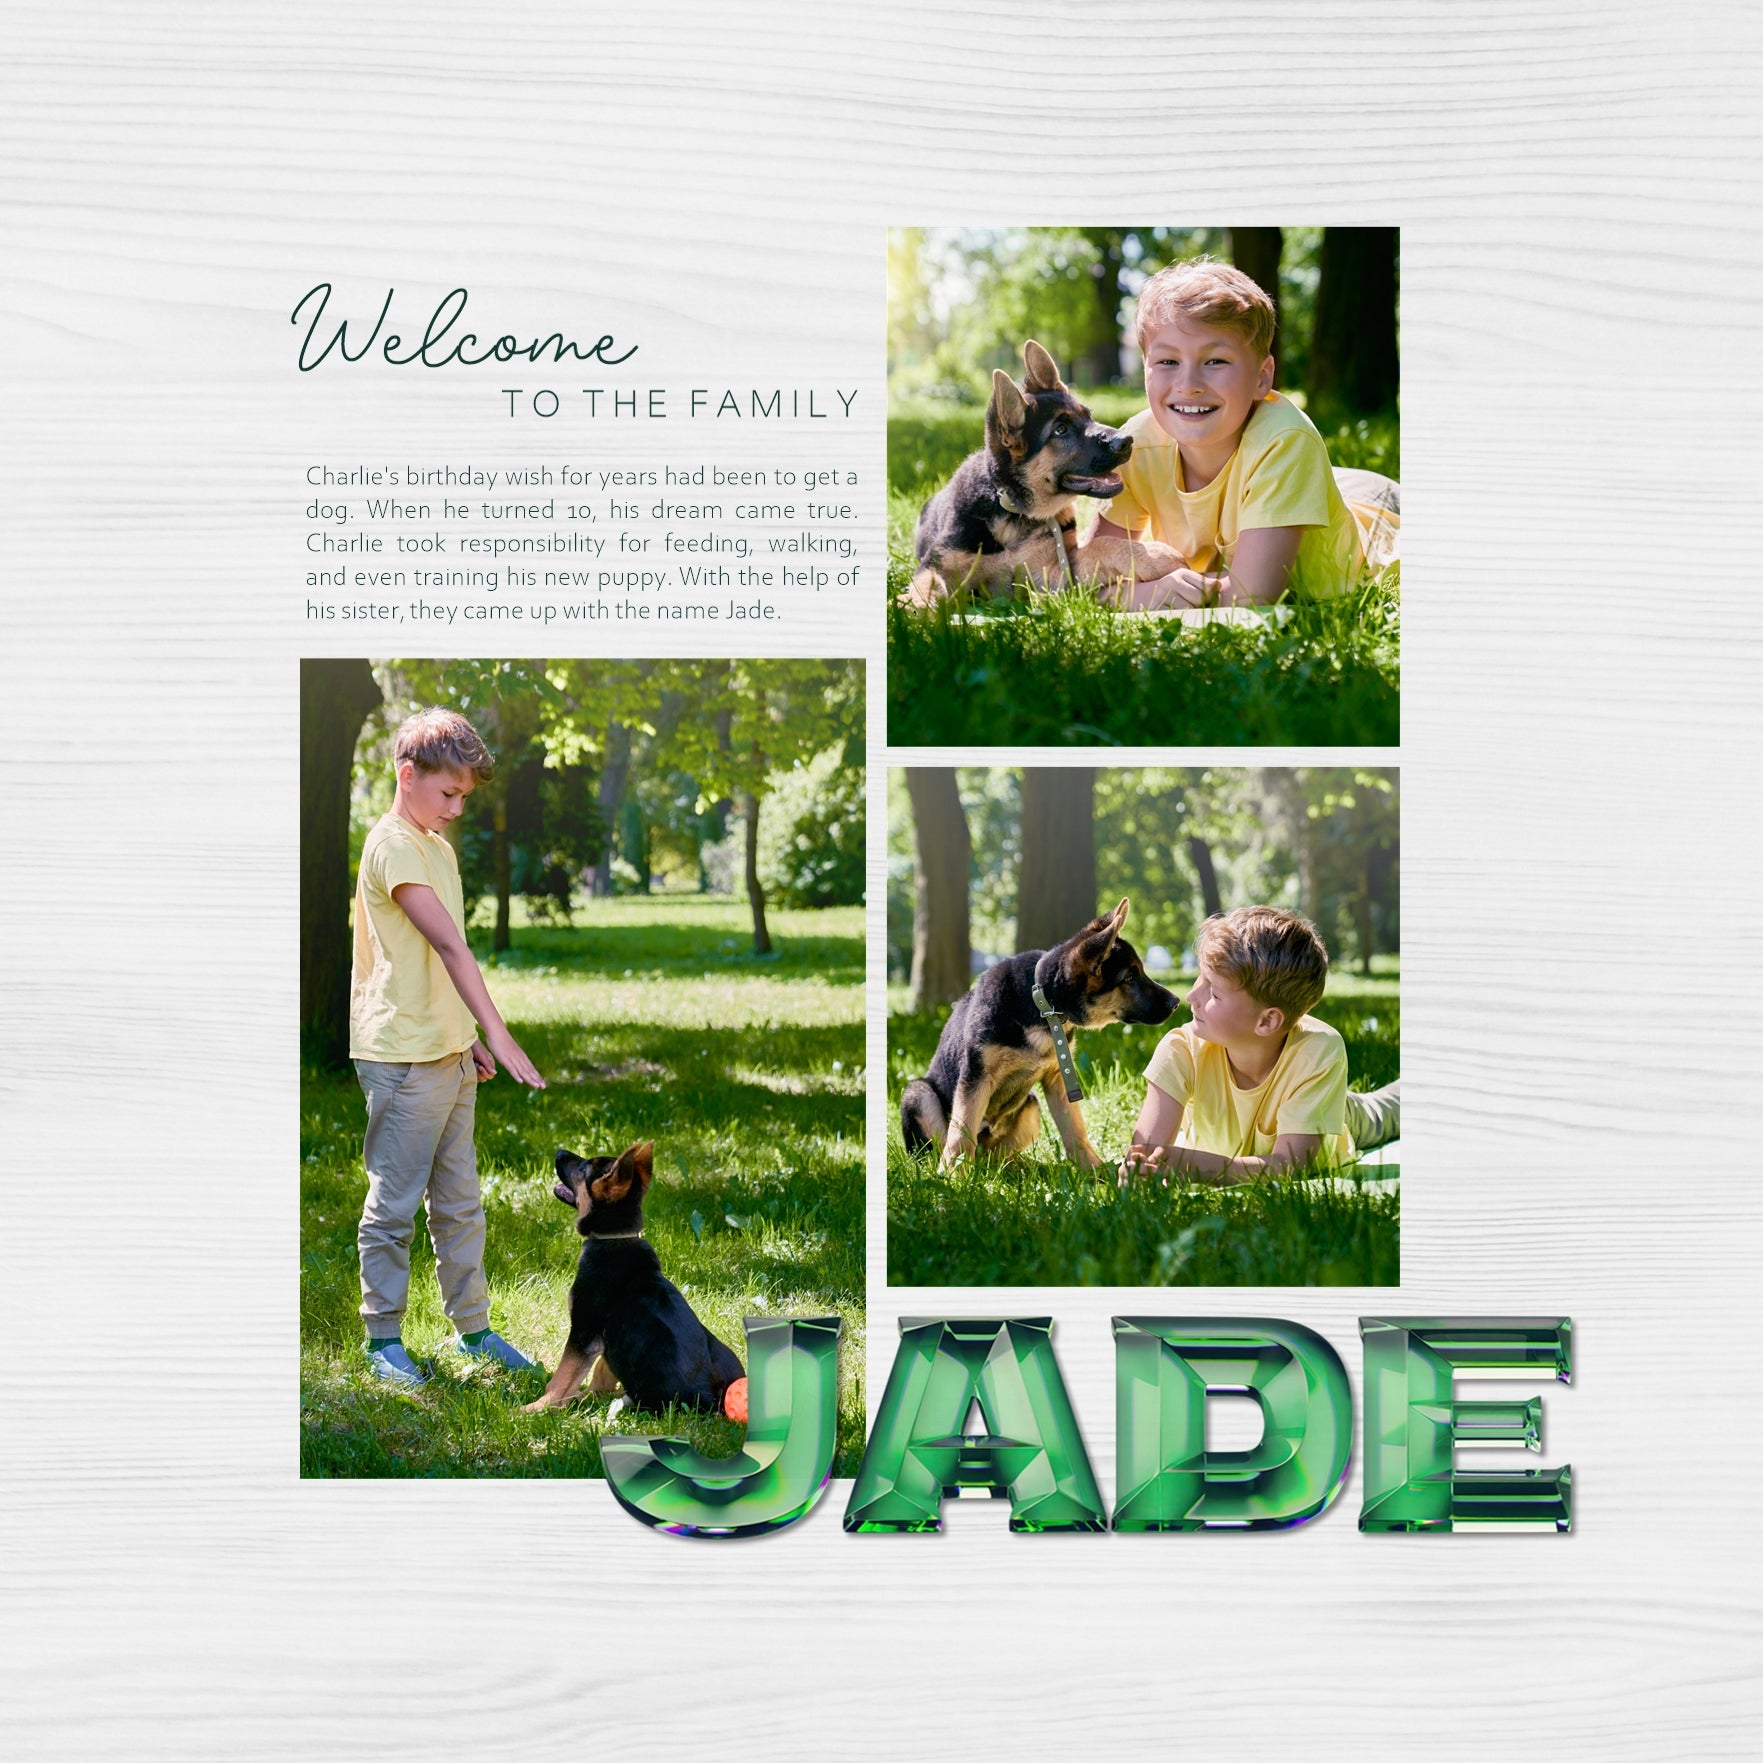 Showcase your family memories with this versatile emerald gem digital alpha set by Lucky Girl Creative. Perfect for Halloween, St. Patrick's Day, wedding or anniversary parties, or forest or tropical adventures. The entire collection is inspired by the Wizard of Oz with an Over the Rainbow theme. The Emerald City Alpha Set consists of a full set of digital art uppercase letters, lowercase letters, numbers 0-9, and most punctuation marks. This alpha set is available as individual embellishments only. 